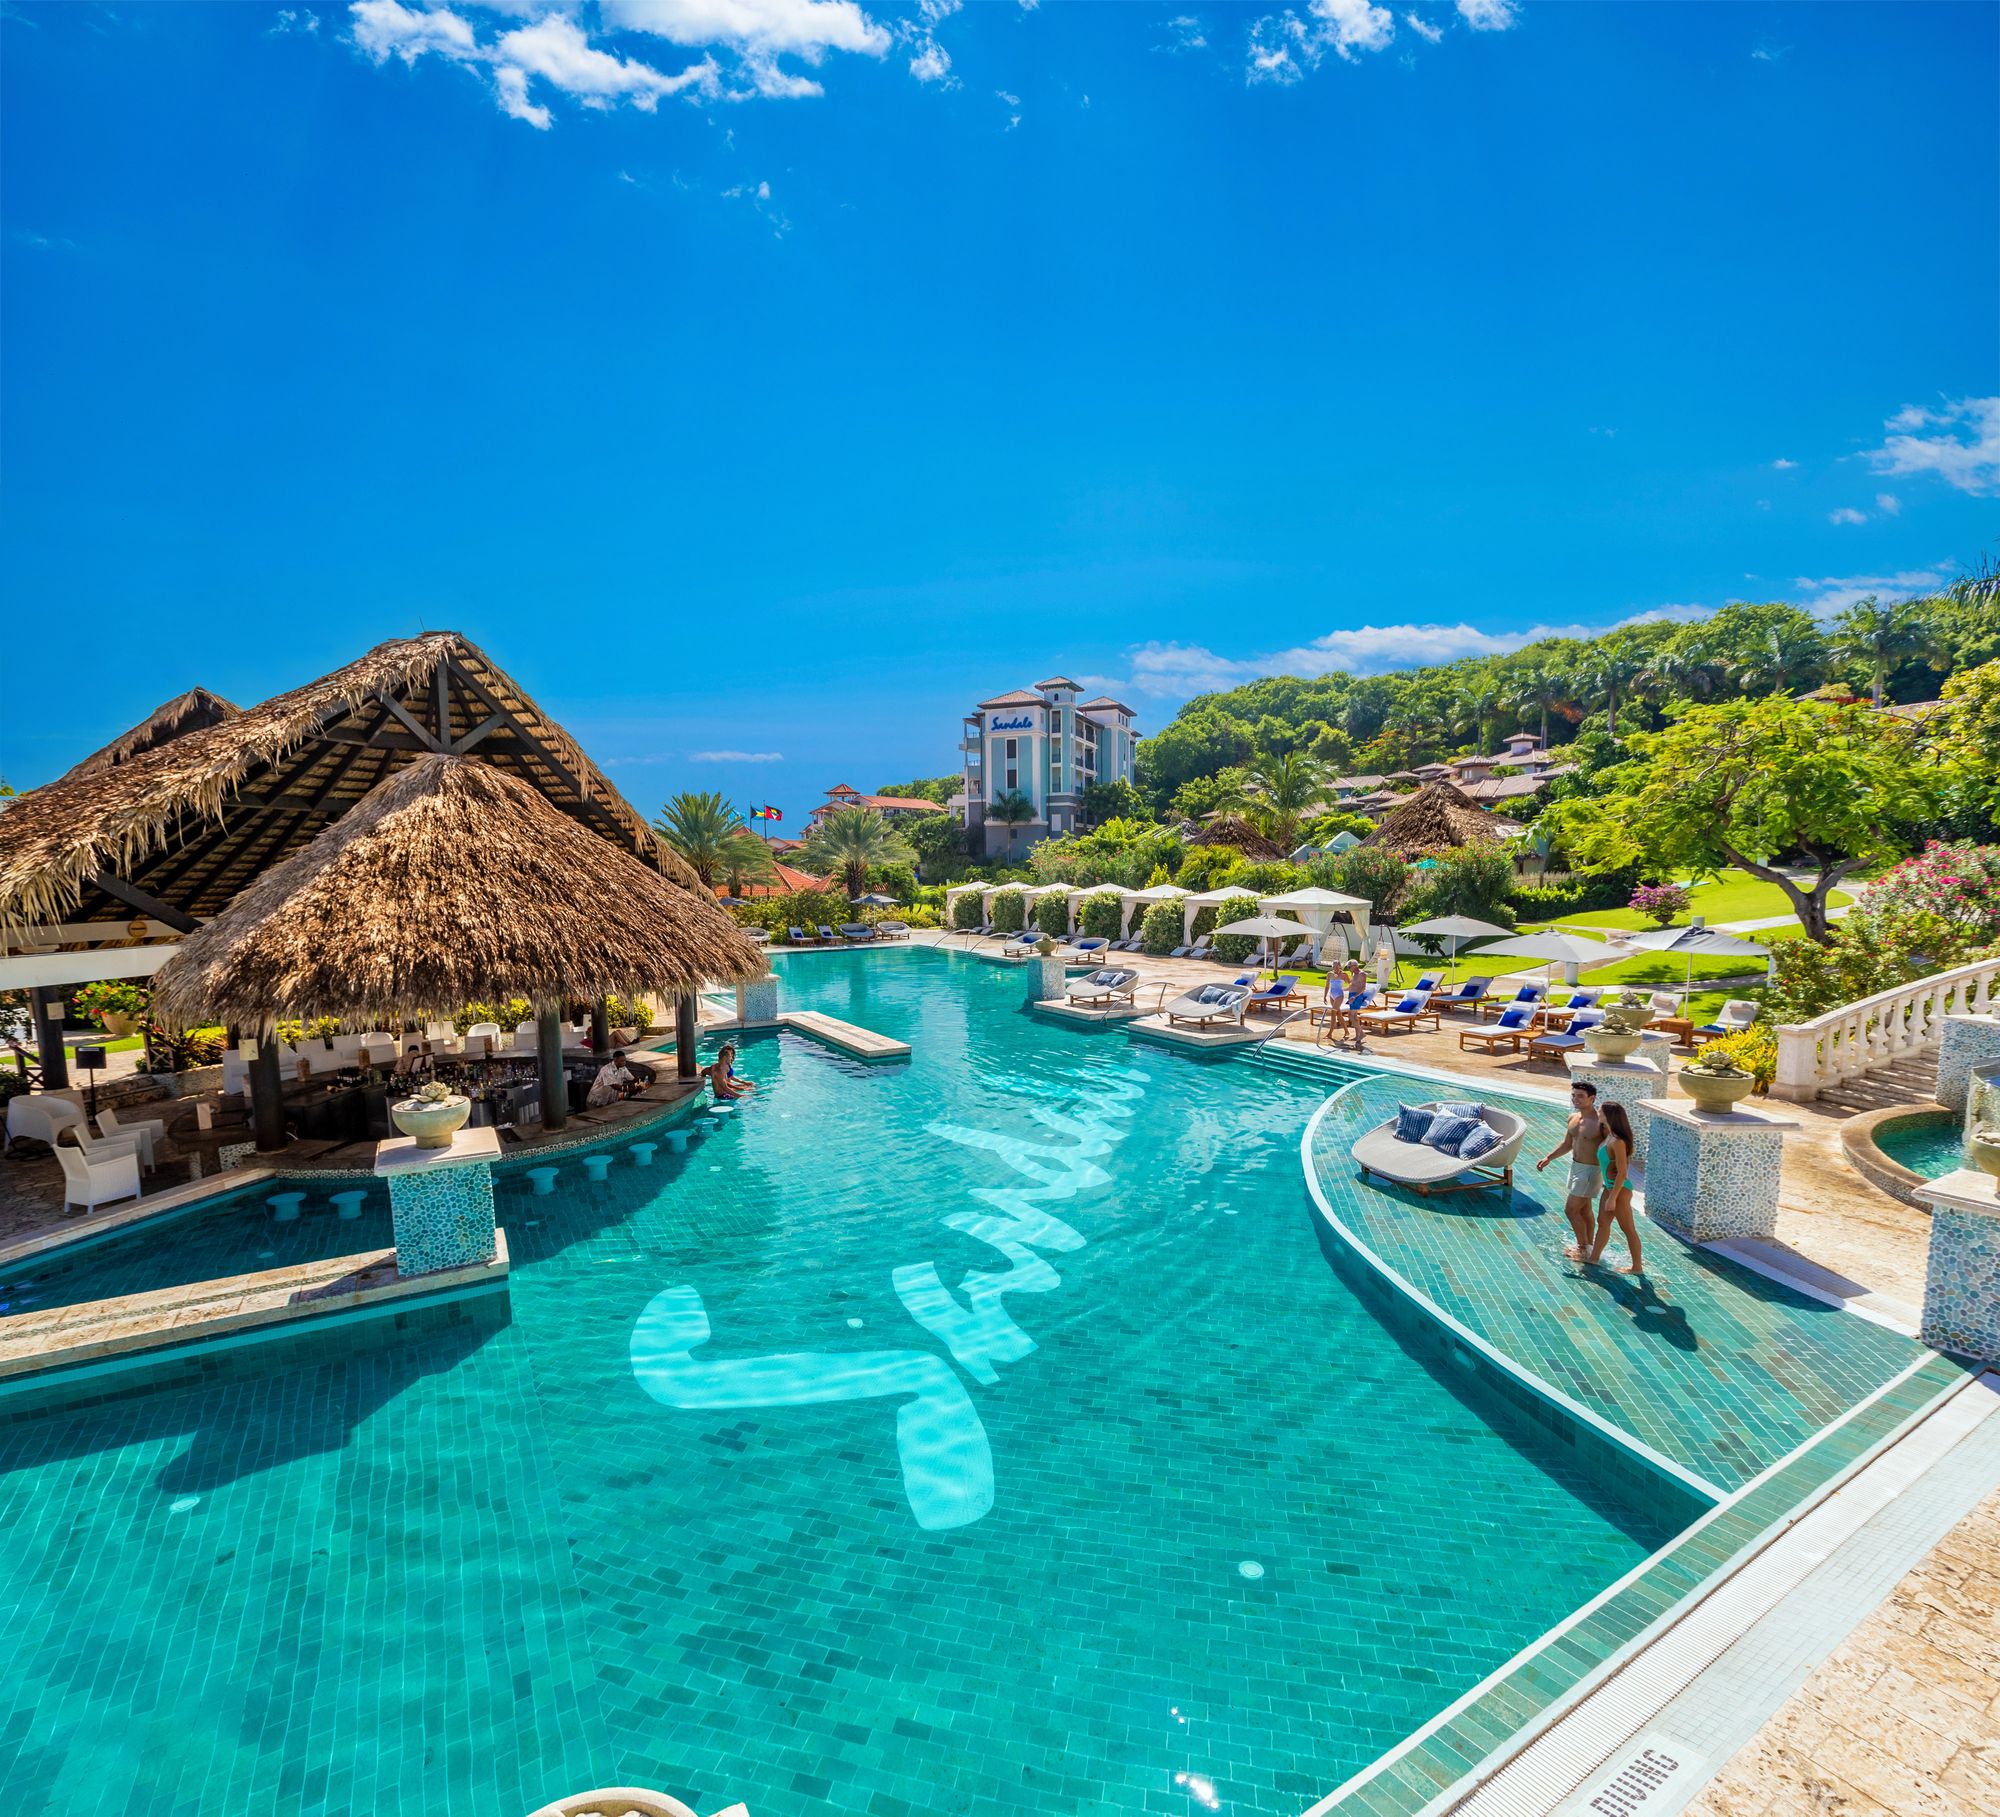 Which Sandals Resort Is Best For You? The 16 Highest Rated Sandals Resorts - Ranked.